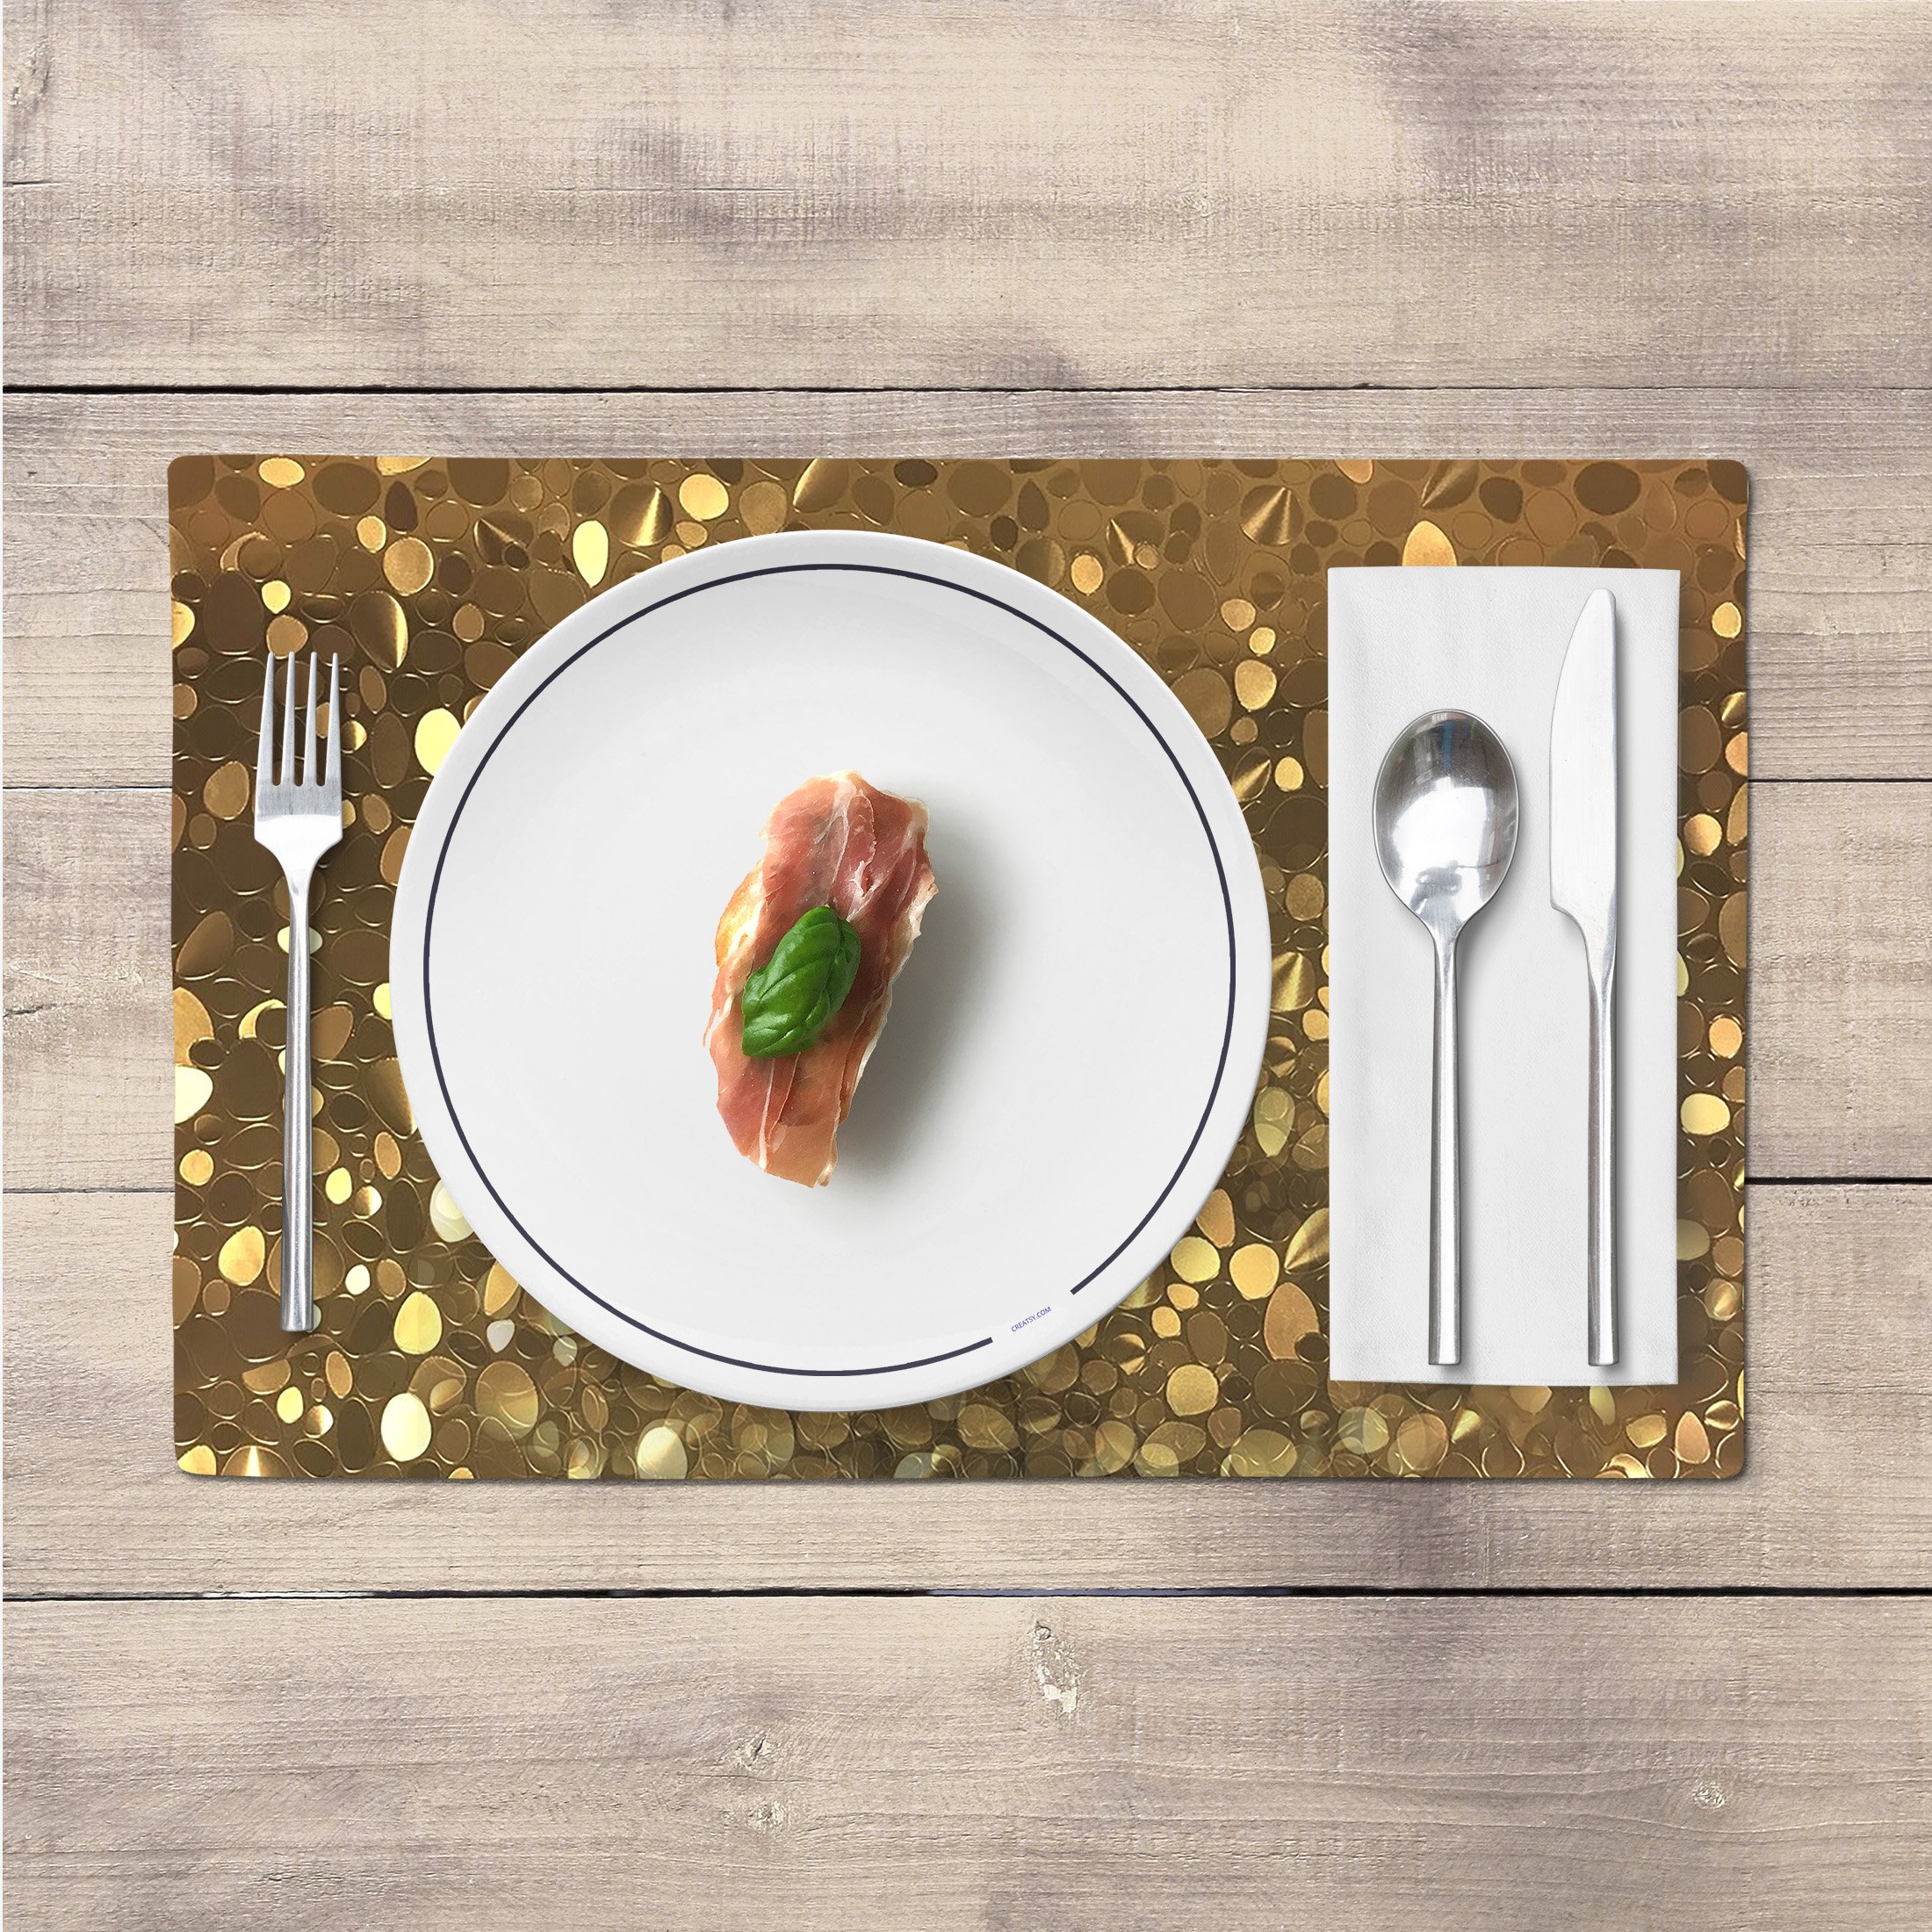 4-Pack: Non-Slip Heat Resistant Metallic Rectangular Place Mats For Dining Table 12 X 18 - Gold